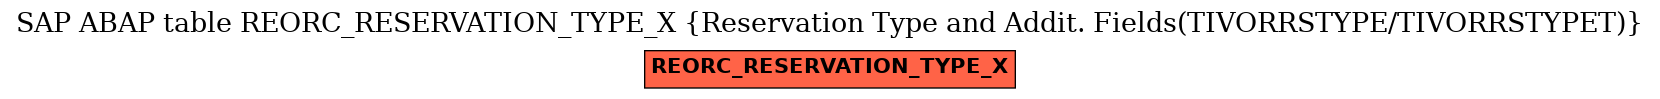 E-R Diagram for table REORC_RESERVATION_TYPE_X (Reservation Type and Addit. Fields(TIVORRSTYPE/TIVORRSTYPET))